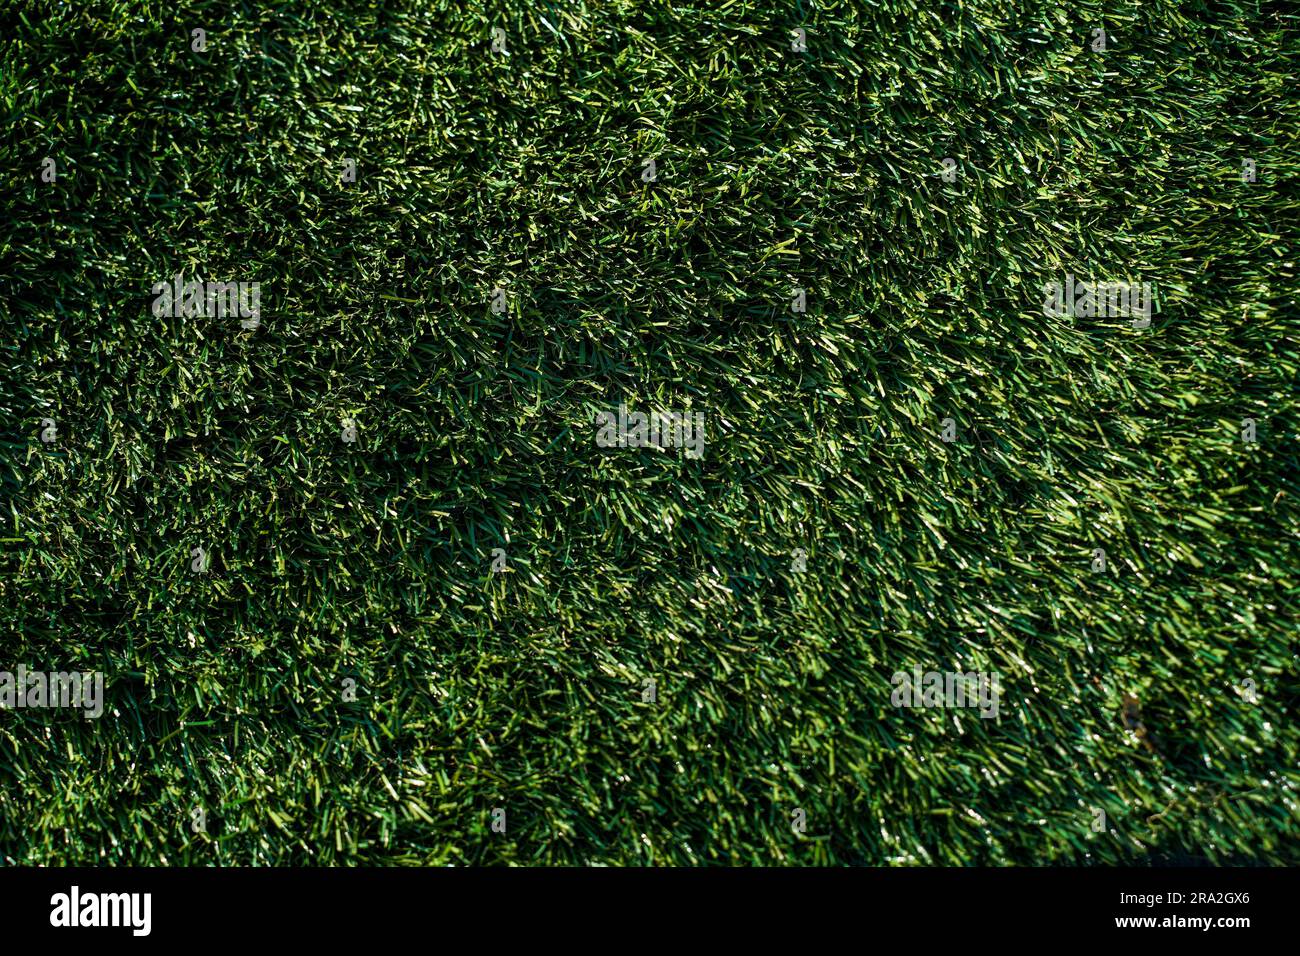 green grass texture, chile Stock Photo